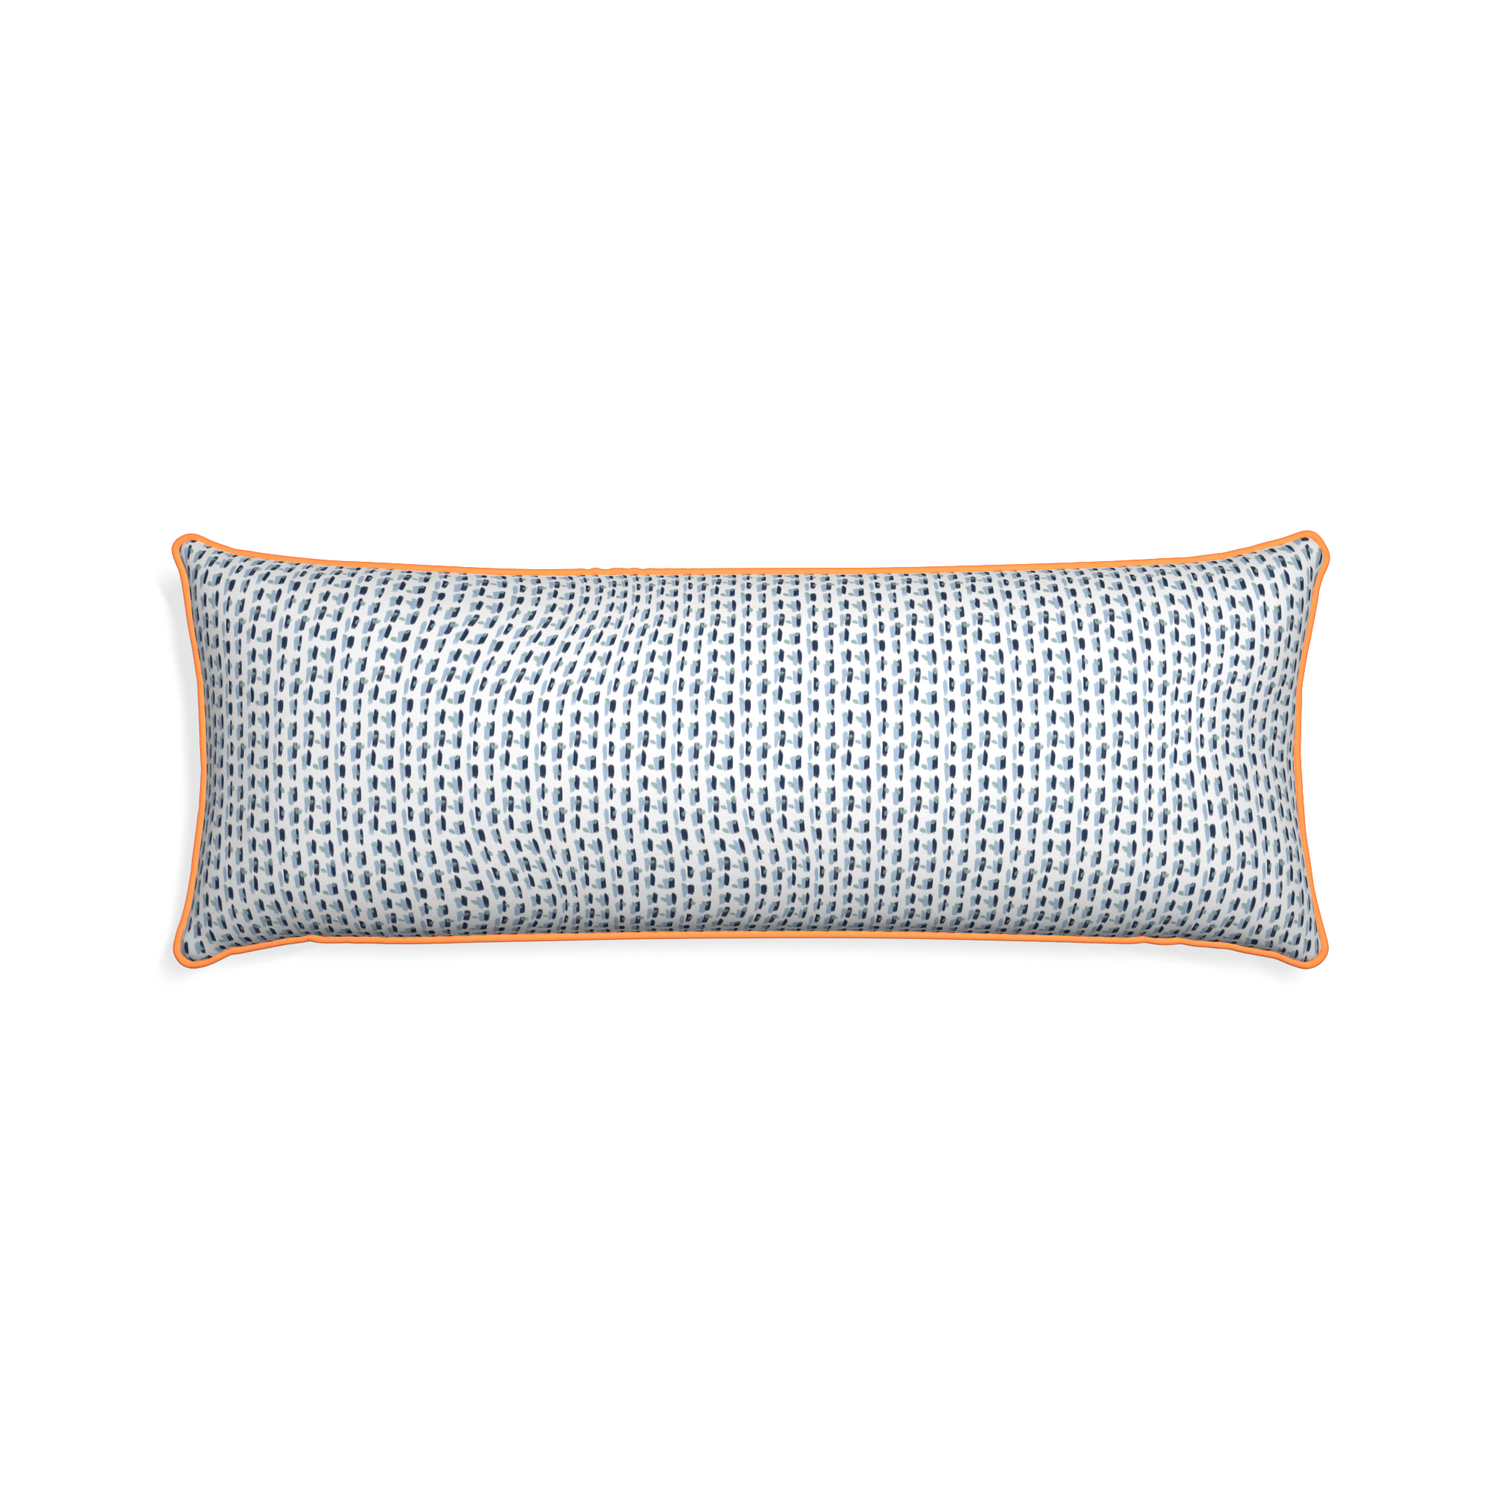 Xl-lumbar poppy blue custom pillow with clementine piping on white background